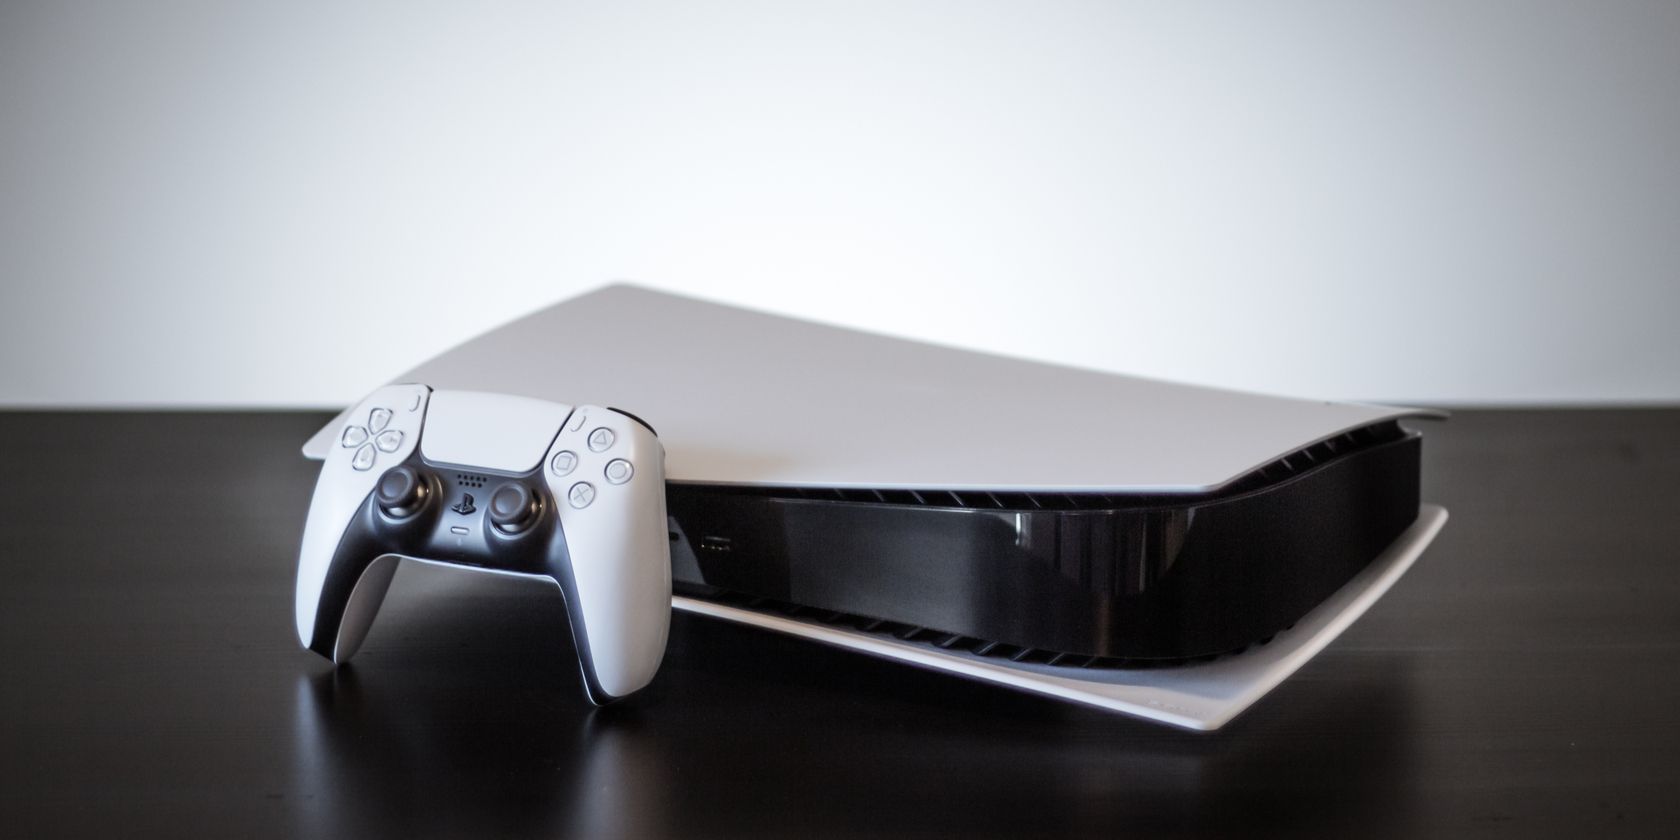 PS5 console and controller on a table